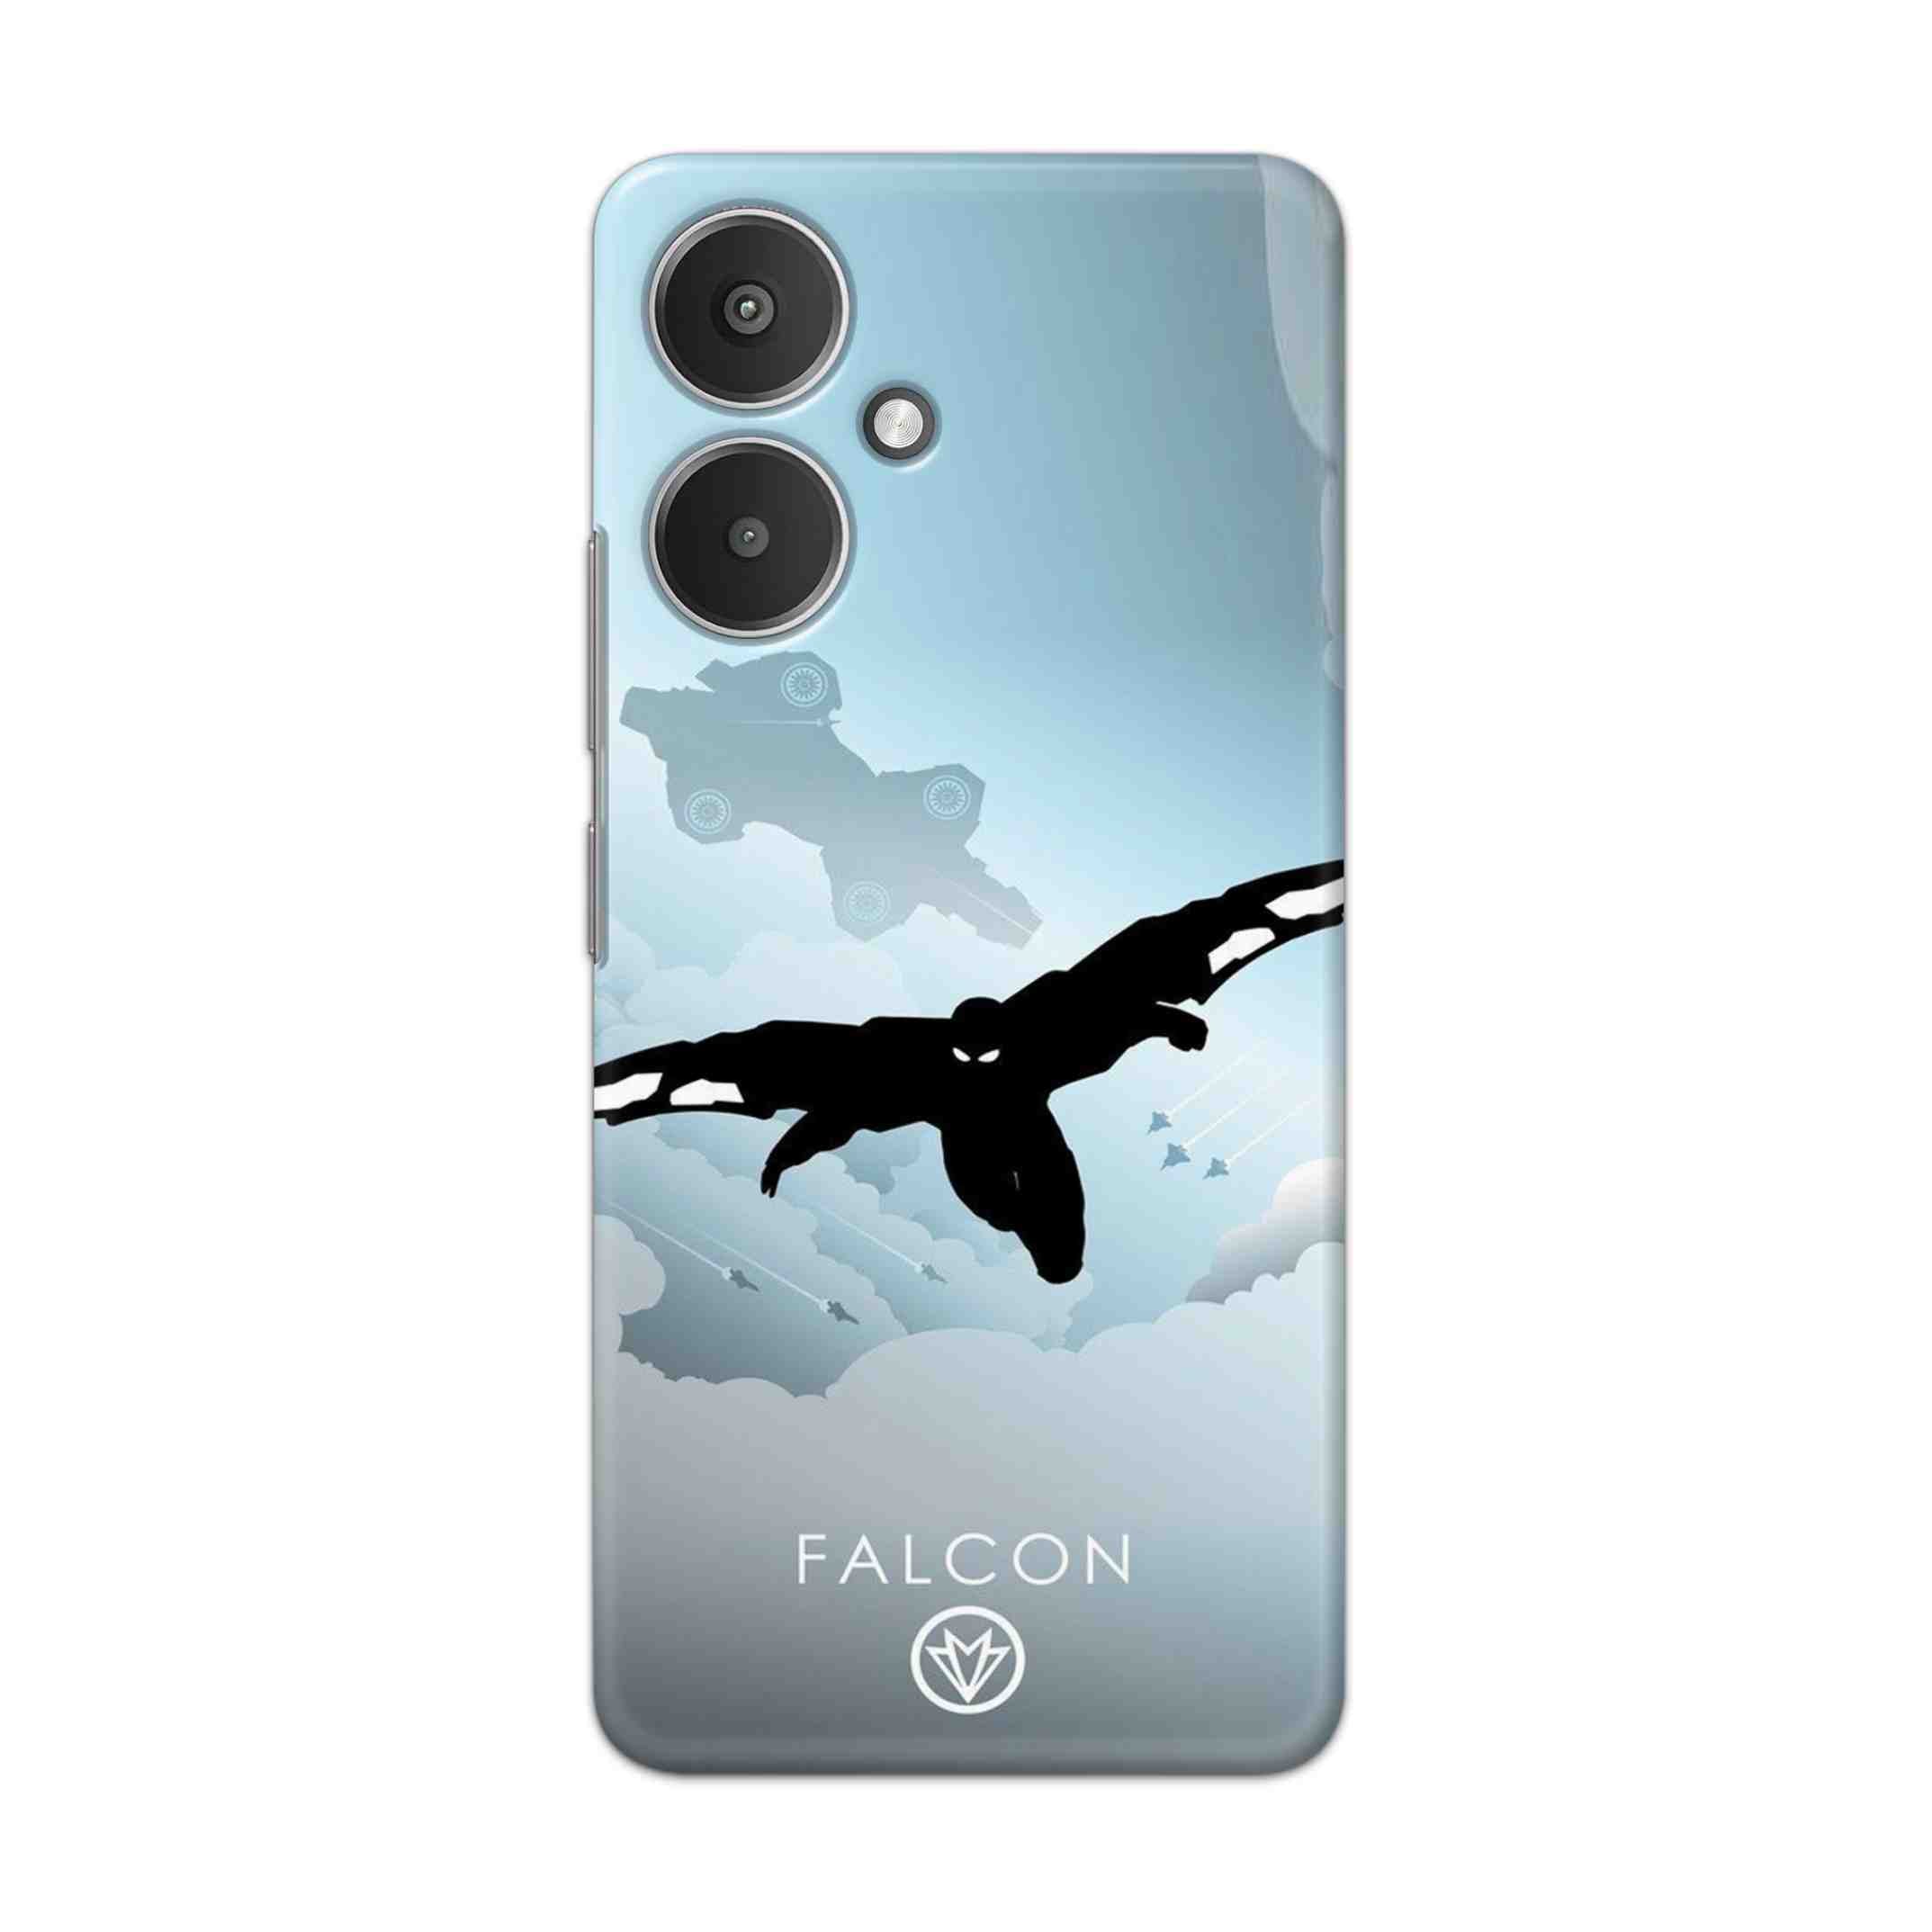 Buy Falcon Hard Back Mobile Phone Case/Cover For Redmi 13C 5G Online